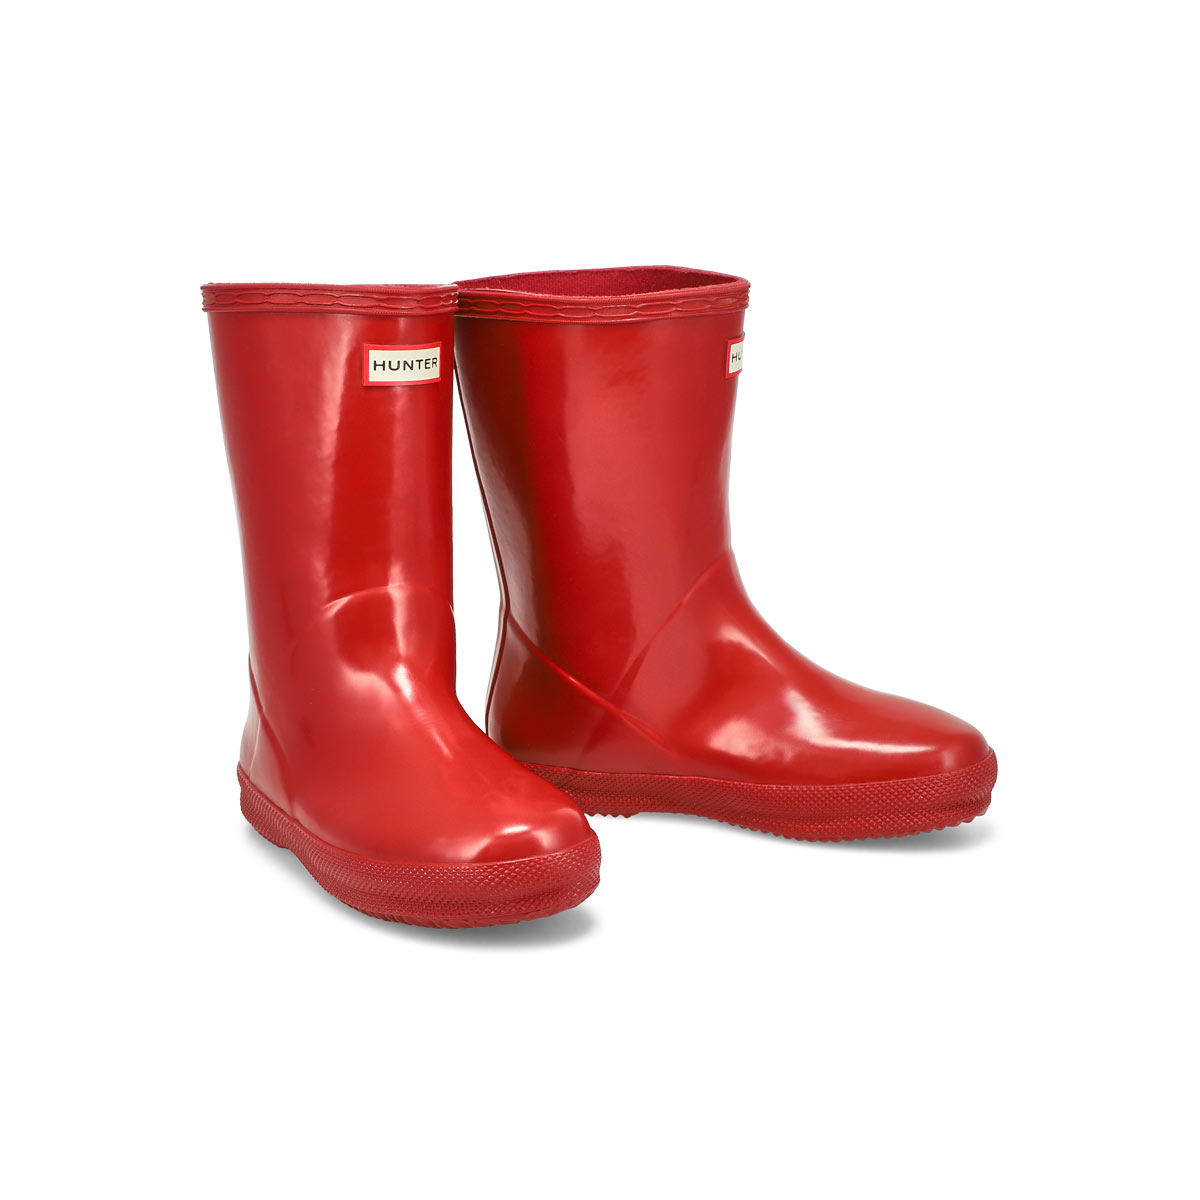 Infants' First Classic Gloss Rain Boot - Red